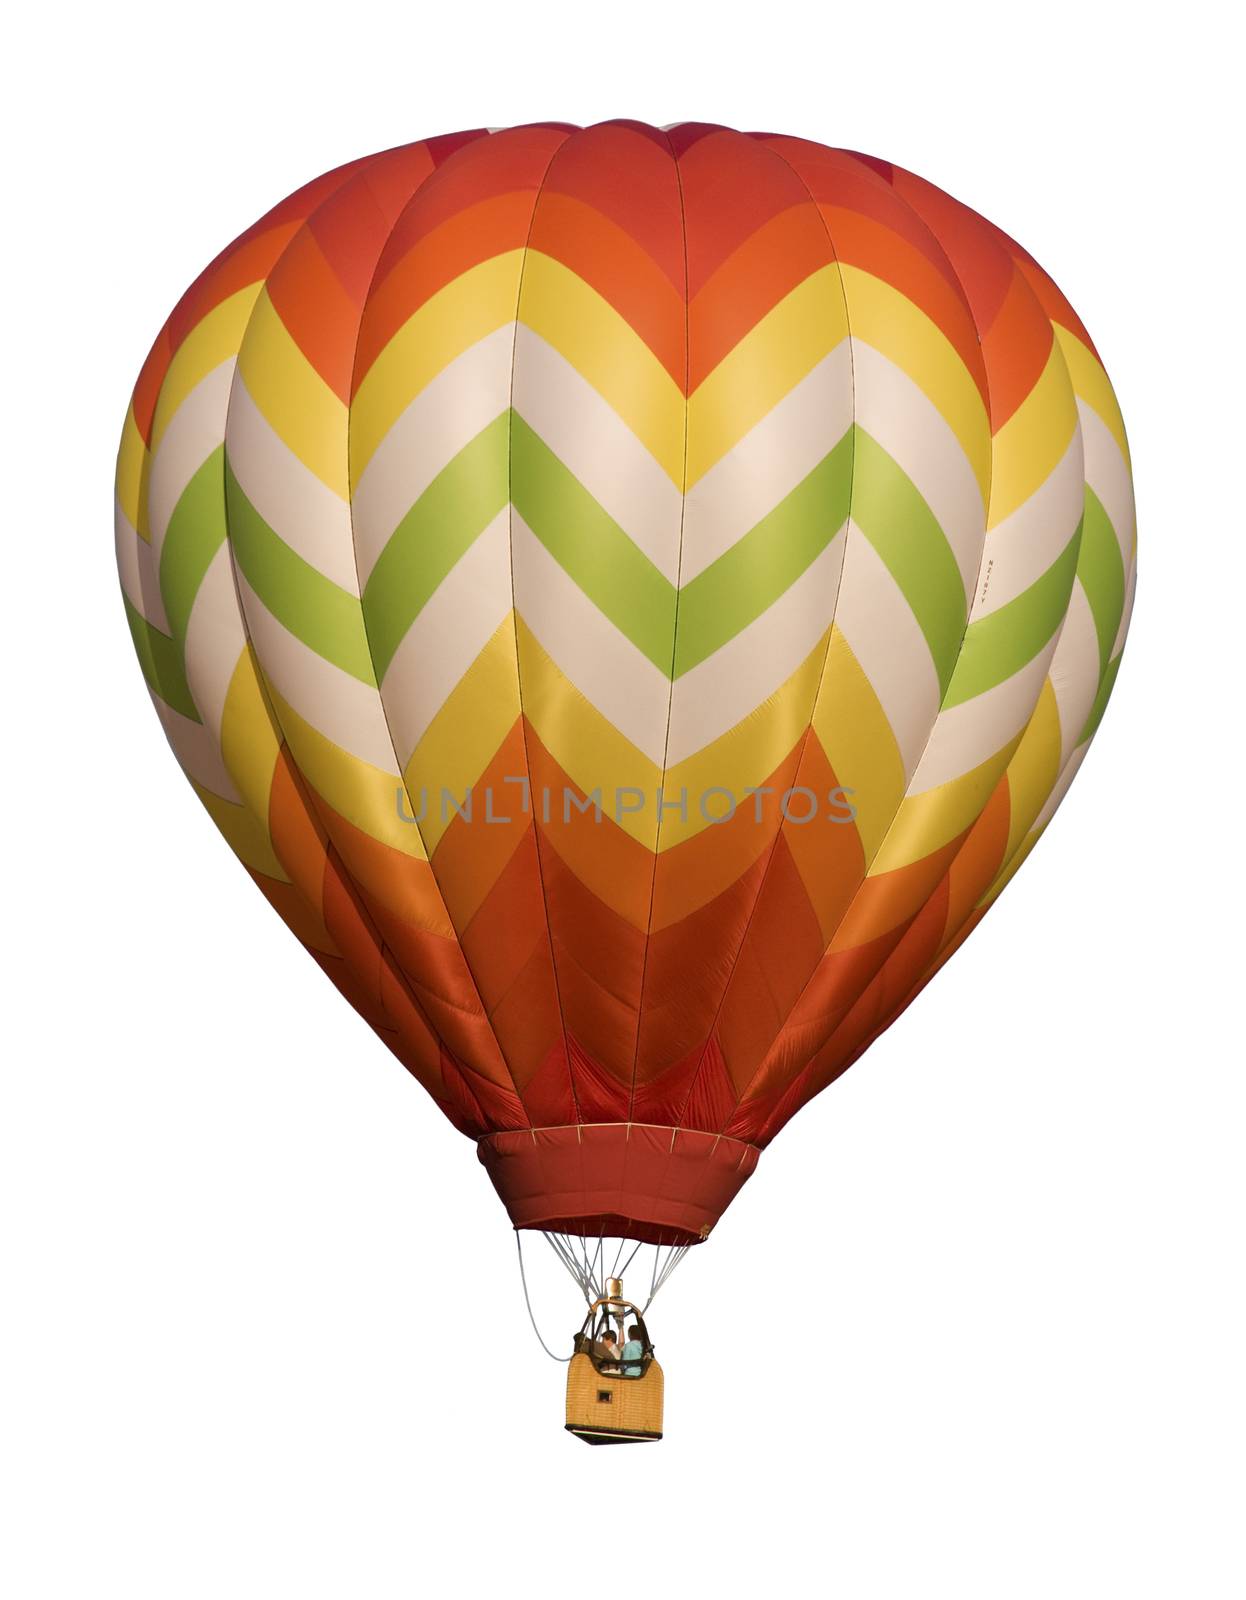 Hot-air balloon floating against white background